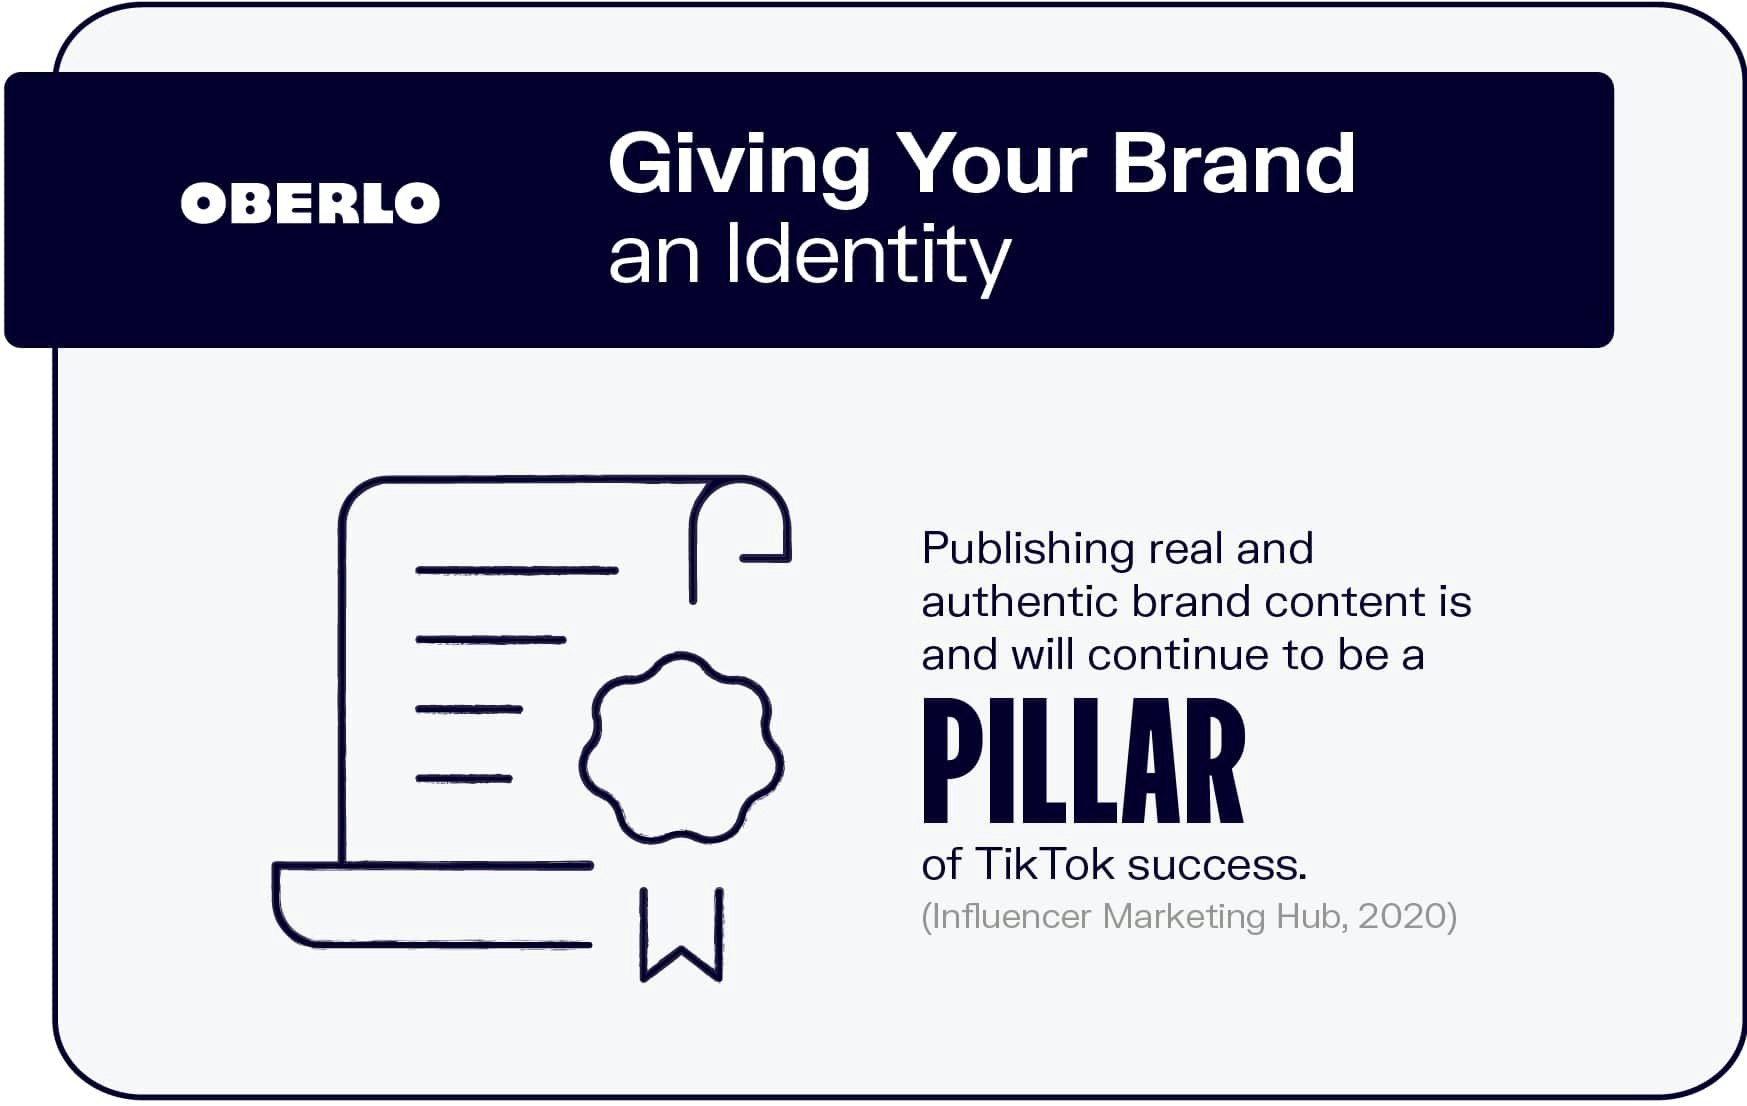 Giving Your Brand an Identity